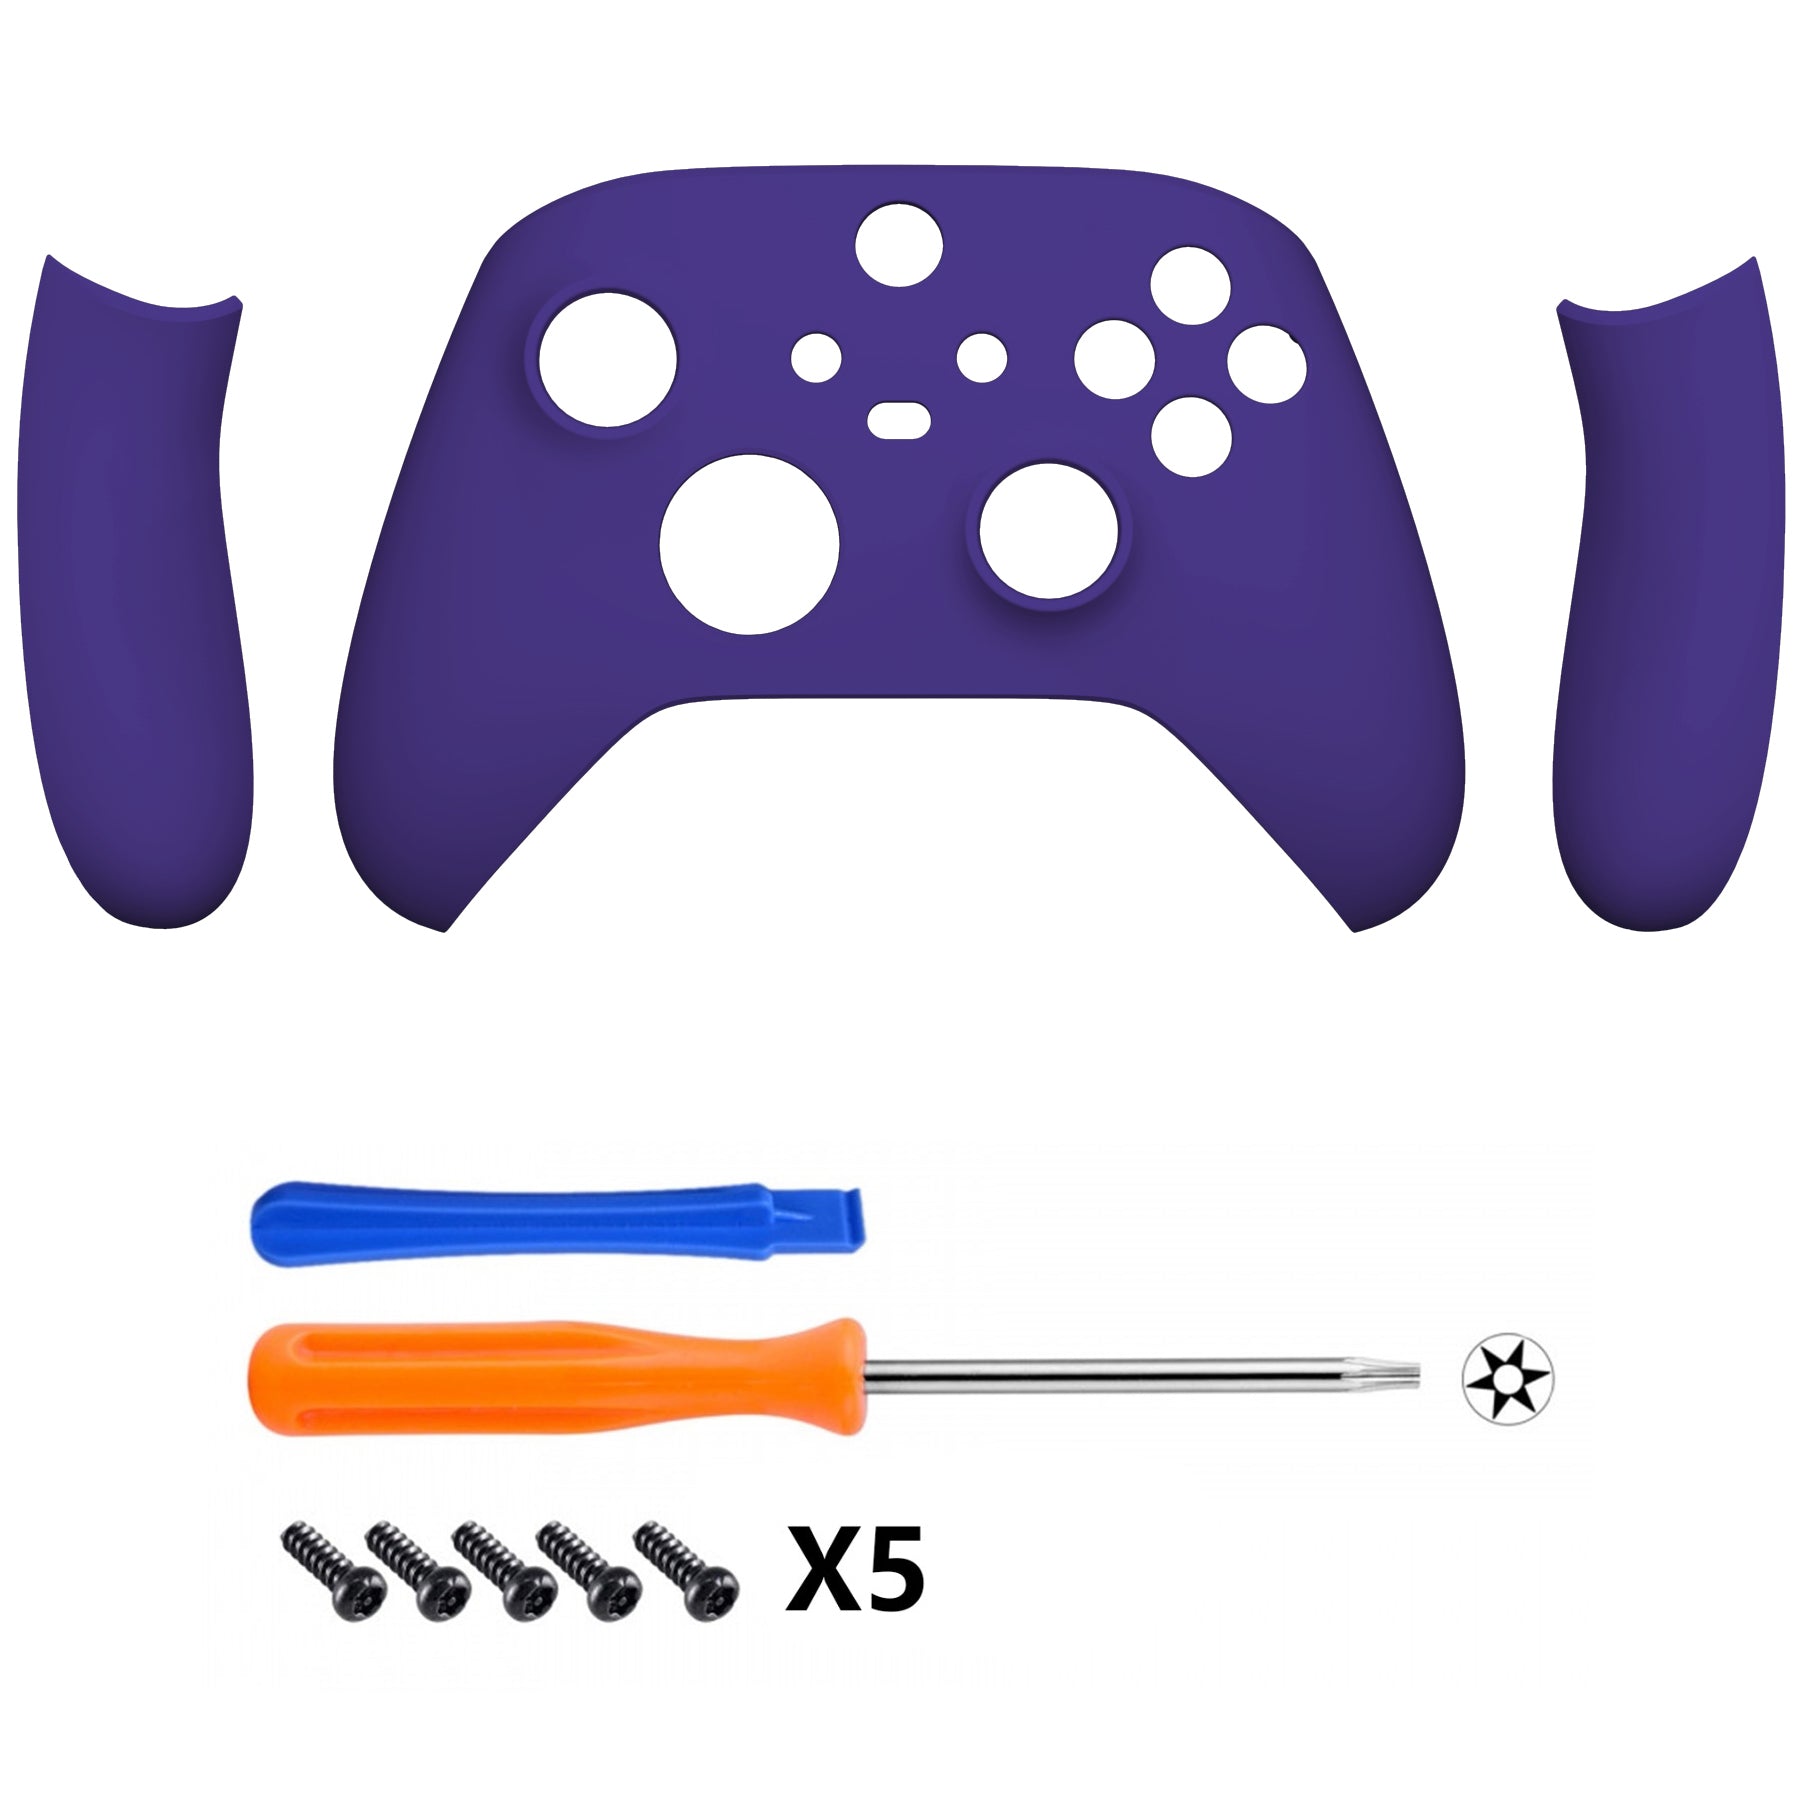 eXtremeRate Retail Soft Touch Purple Replacement Handles Shell for Xbox Series X Controller, Custom Side Rails Panels Front Housing Shell Faceplate for Xbox Series S Controller - Controller NOT Included - ZX3P307